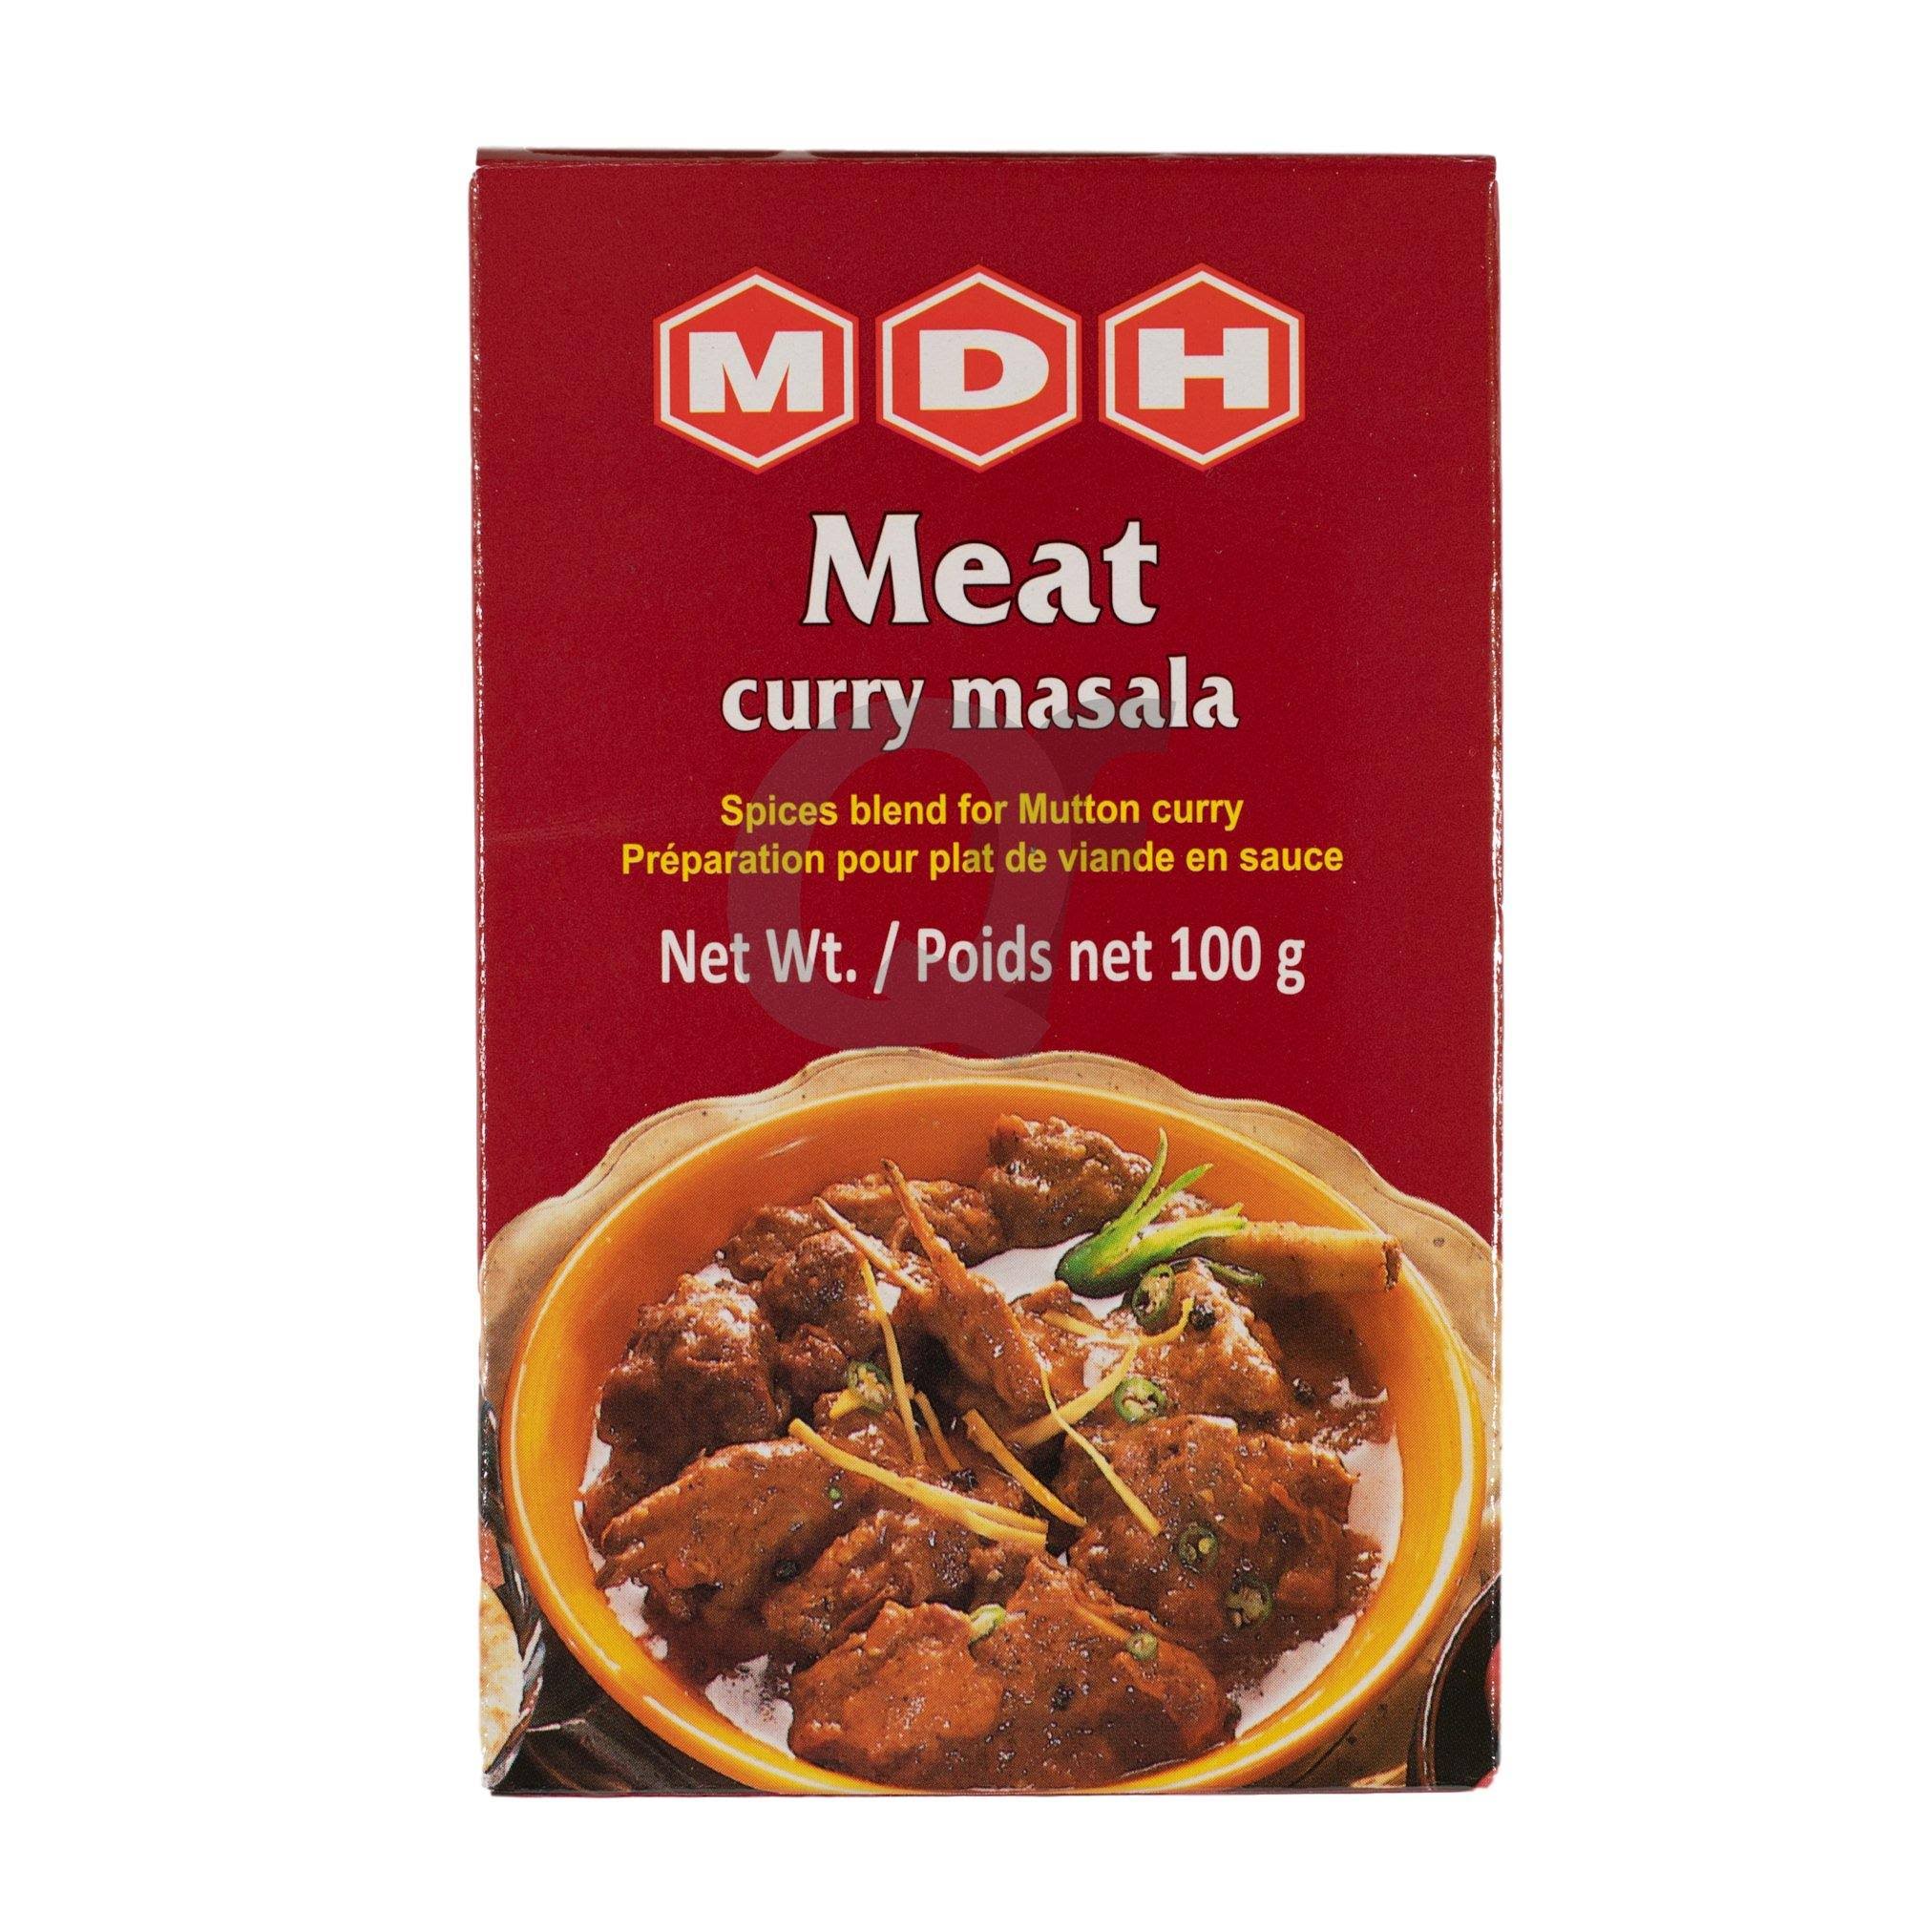 Mdh Meat Curry Masala - 100g